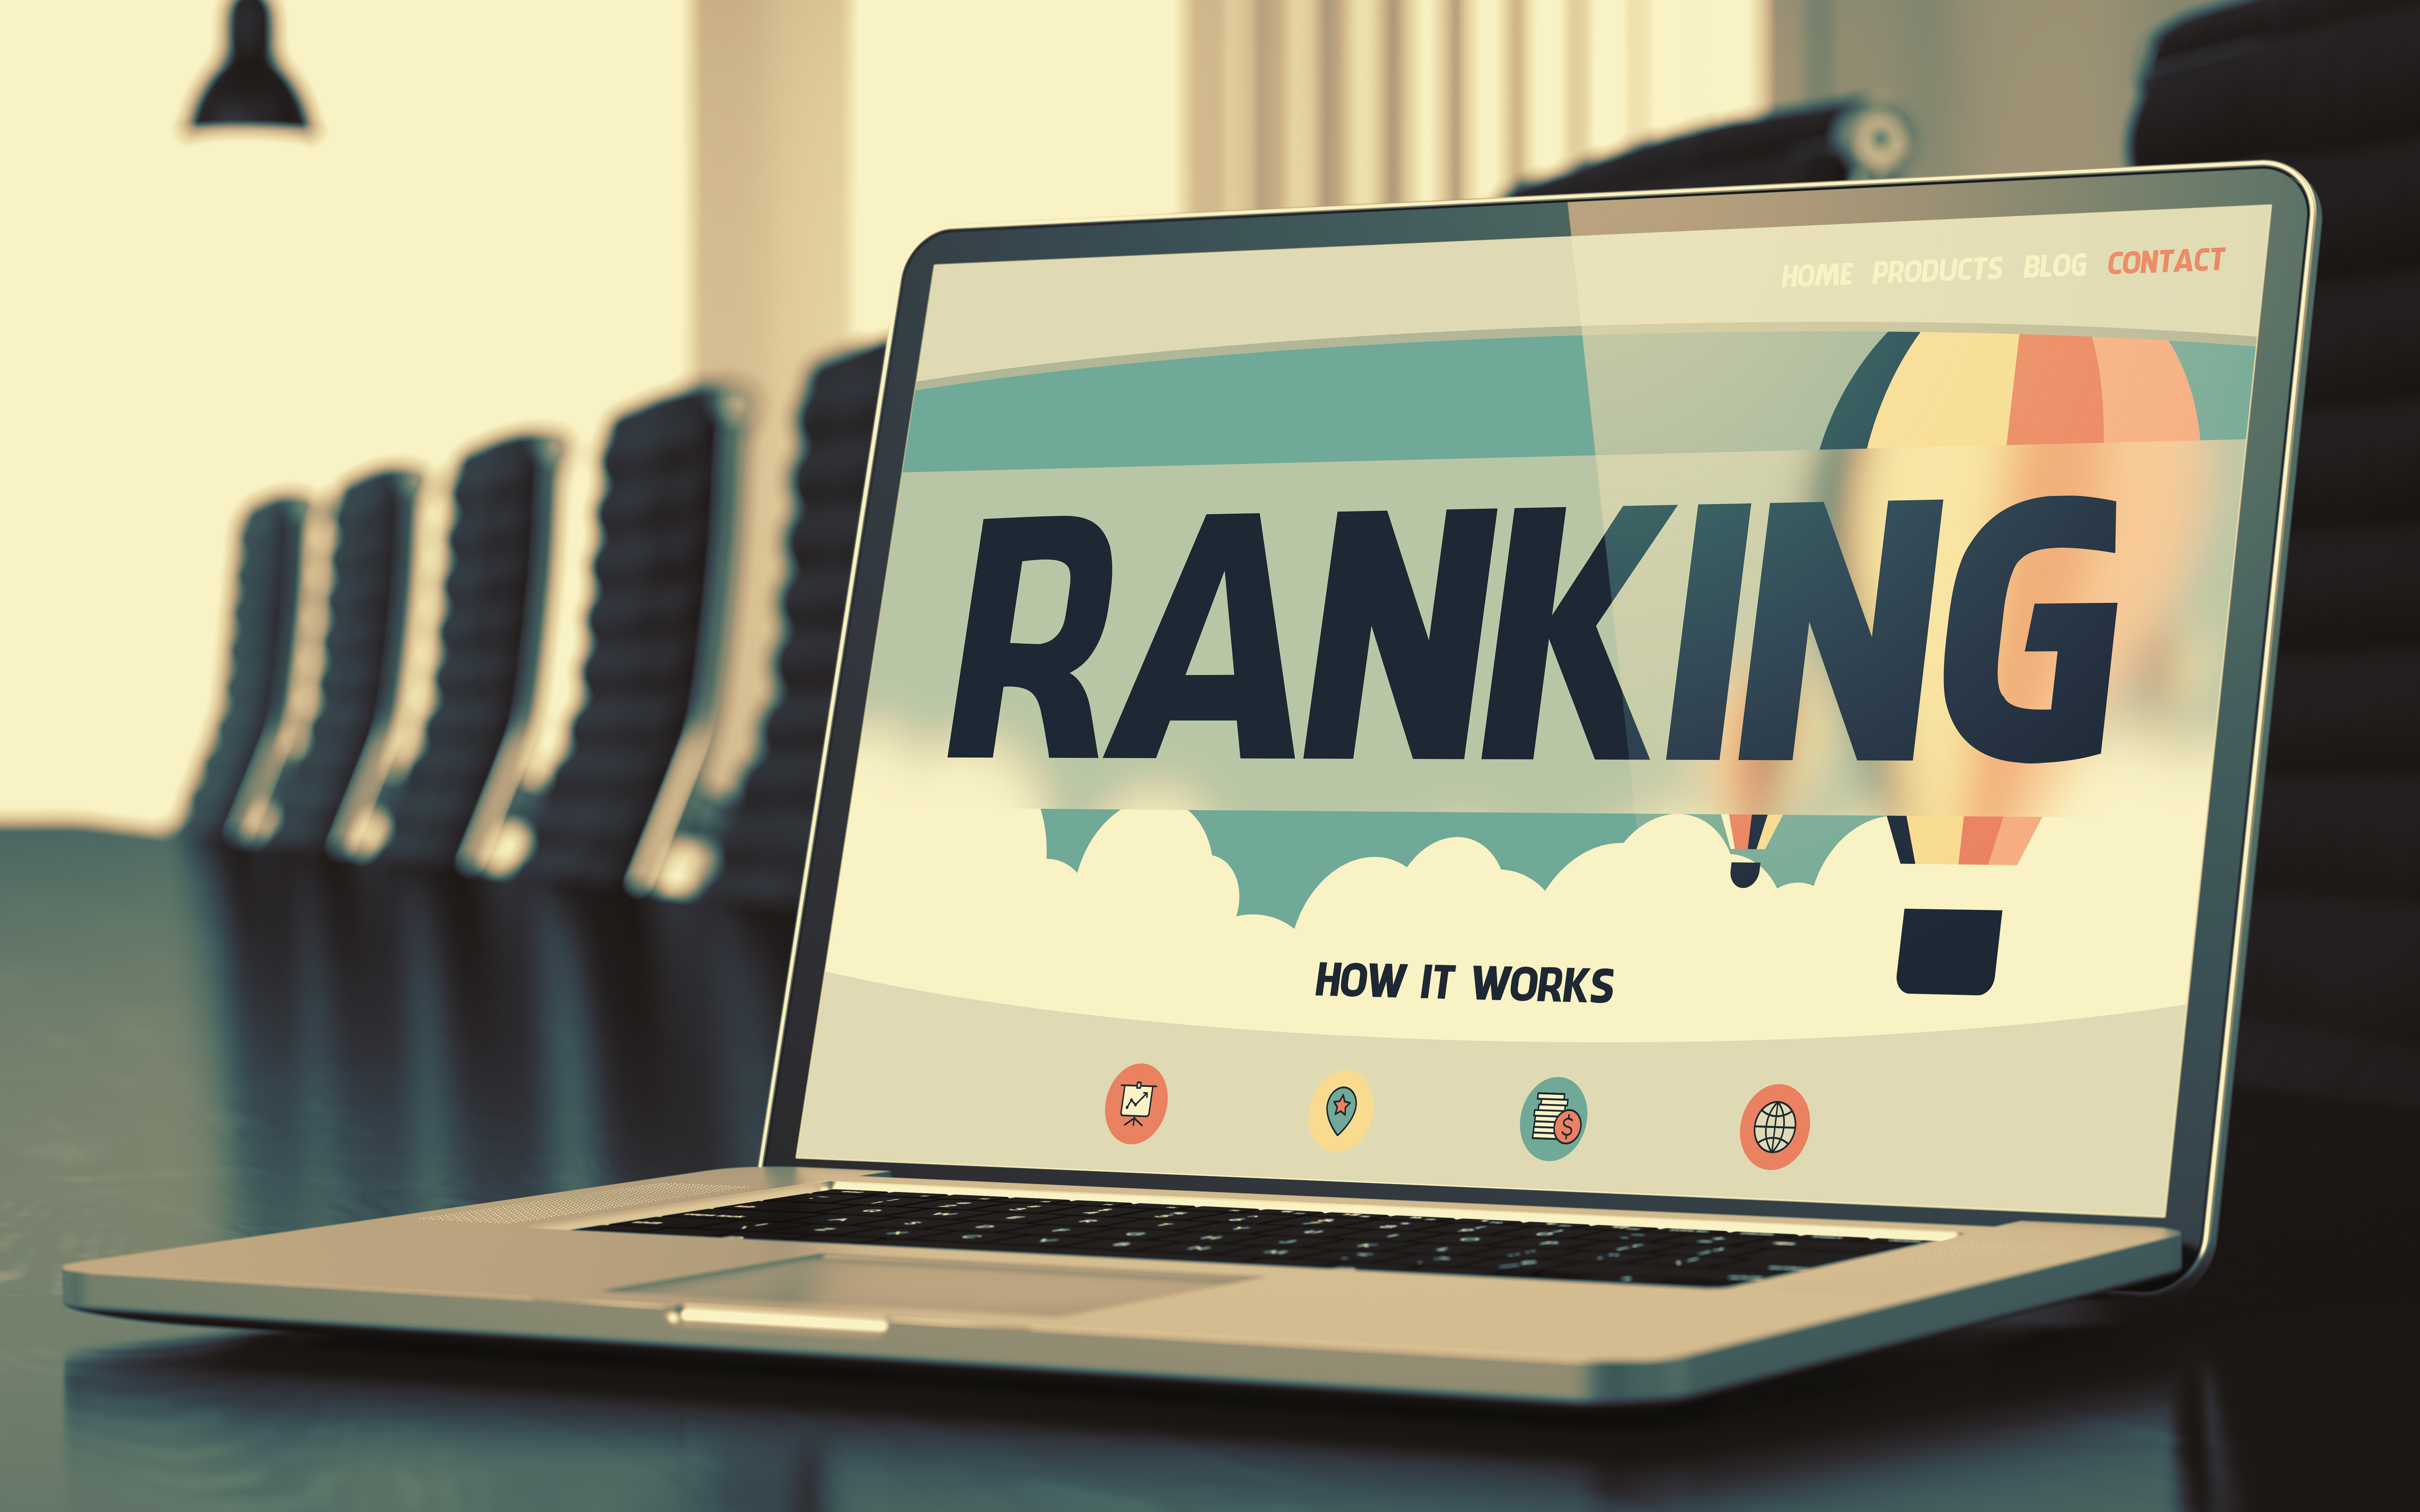 Rank Higher with Link Building, Citations and Get Found Online